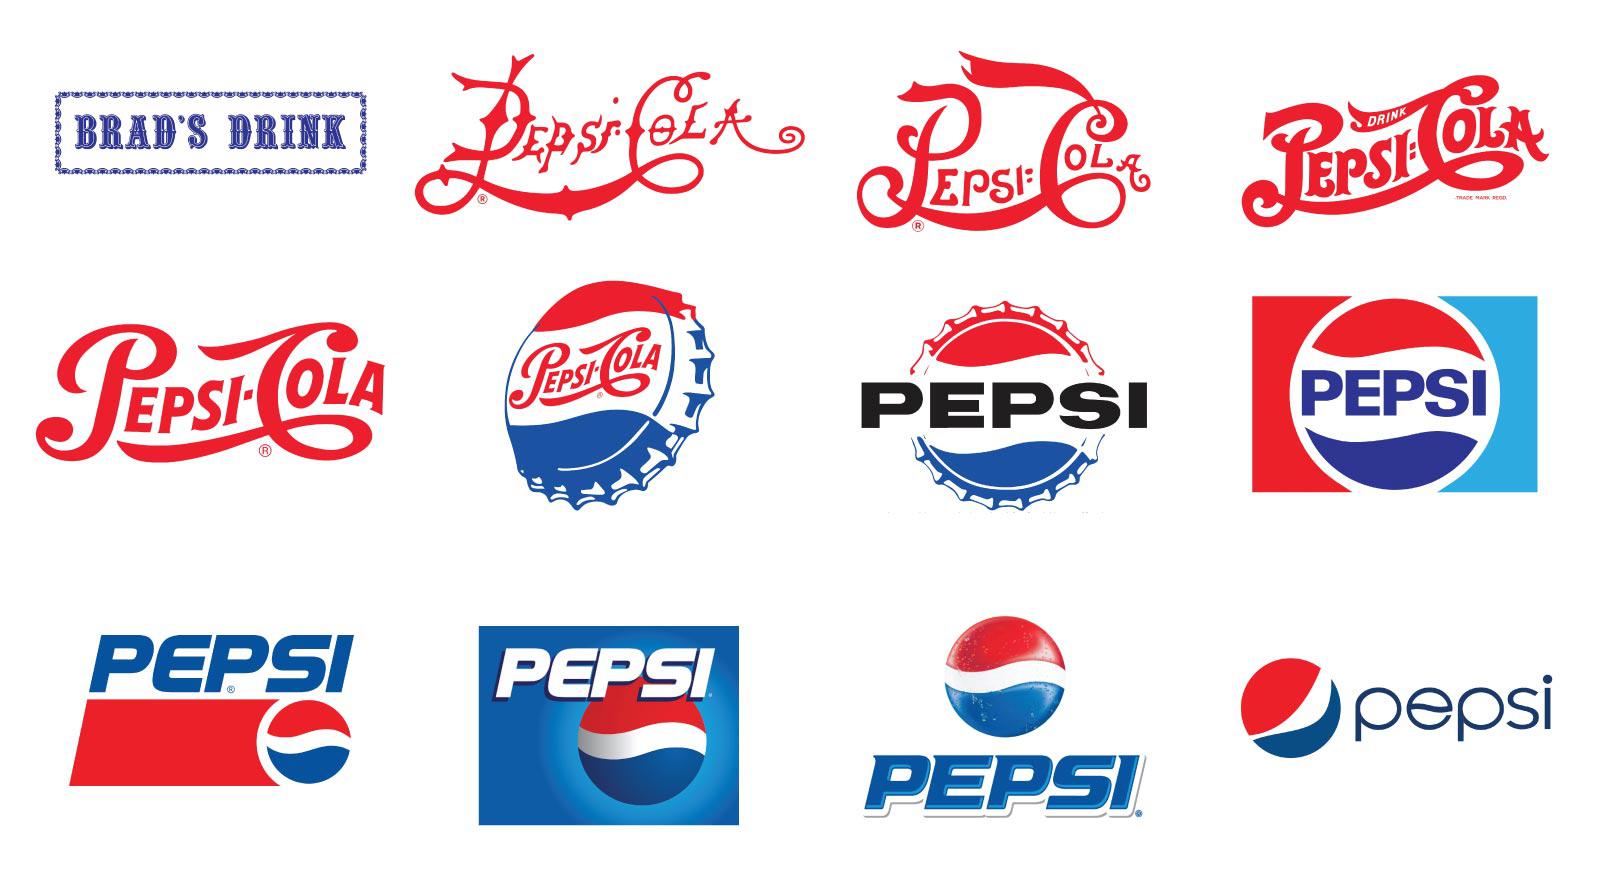 Pepsi Logo Projects :: Photos, videos, logos, illustrations and branding ::  Behance